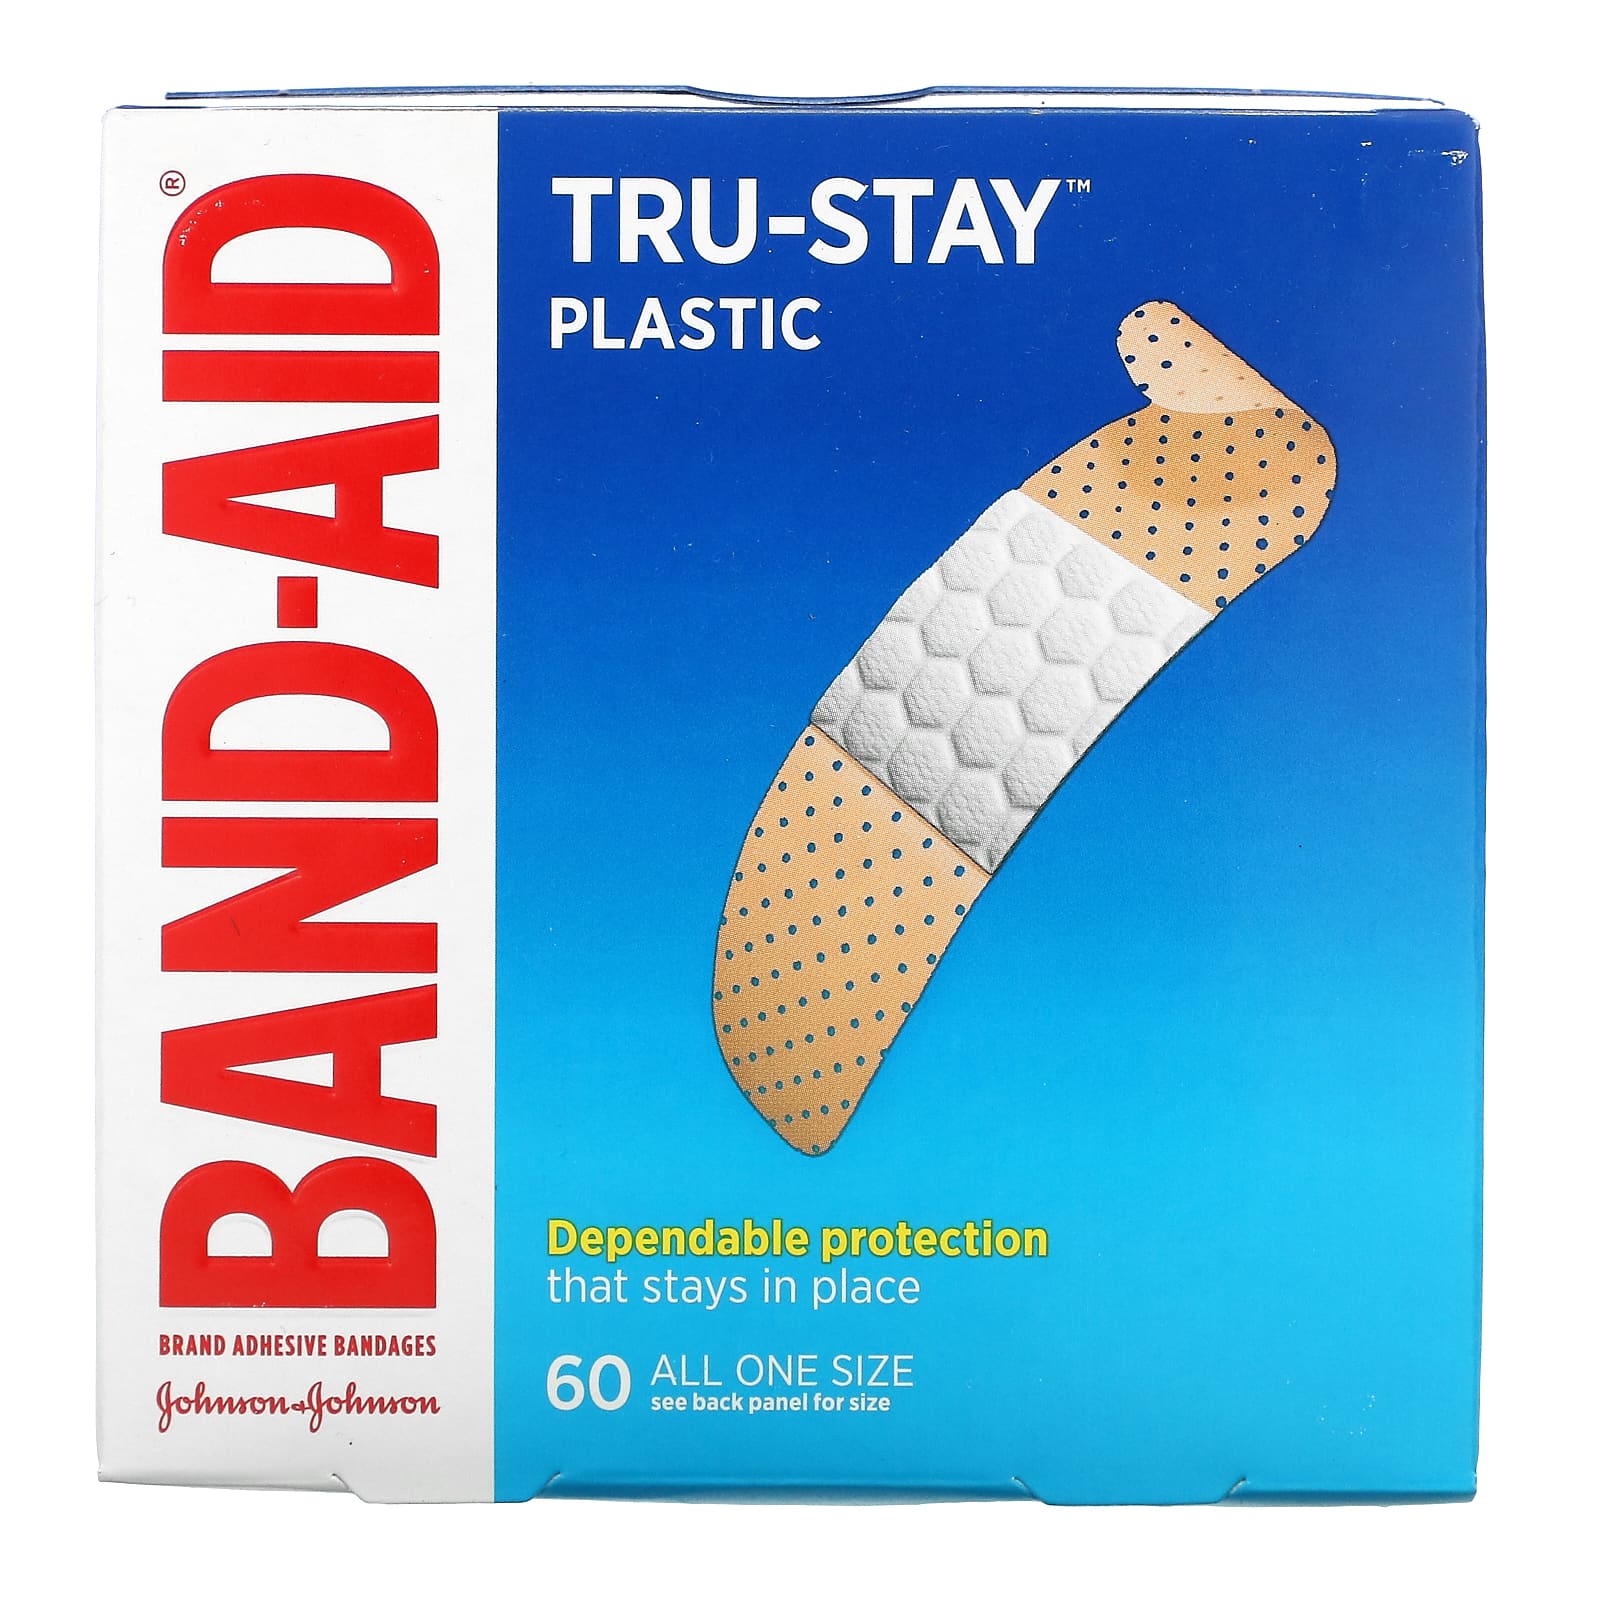 3 8cmx3 8cm hypoallergenic non woven adhesive wound dressing band aid bandage large wound first aid outdoor 10pcs Band Aid Adhesive Bandages Plastic Strips 60 Bandages